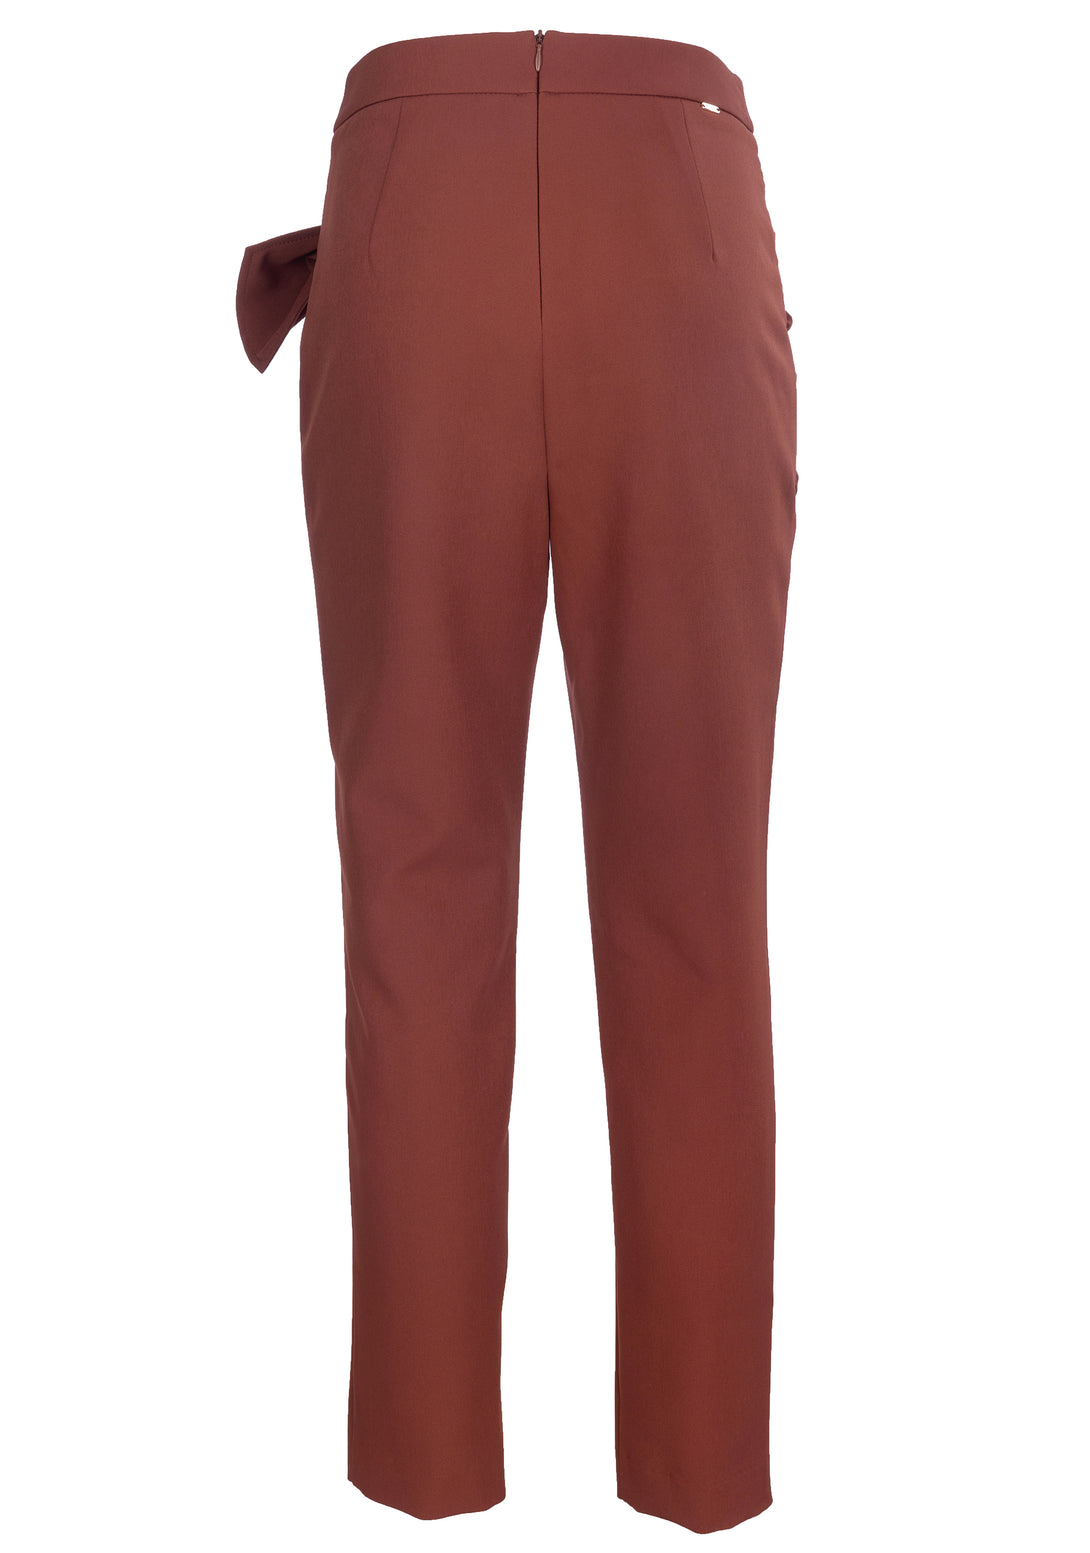 Pant slim fit made in stretch fabric